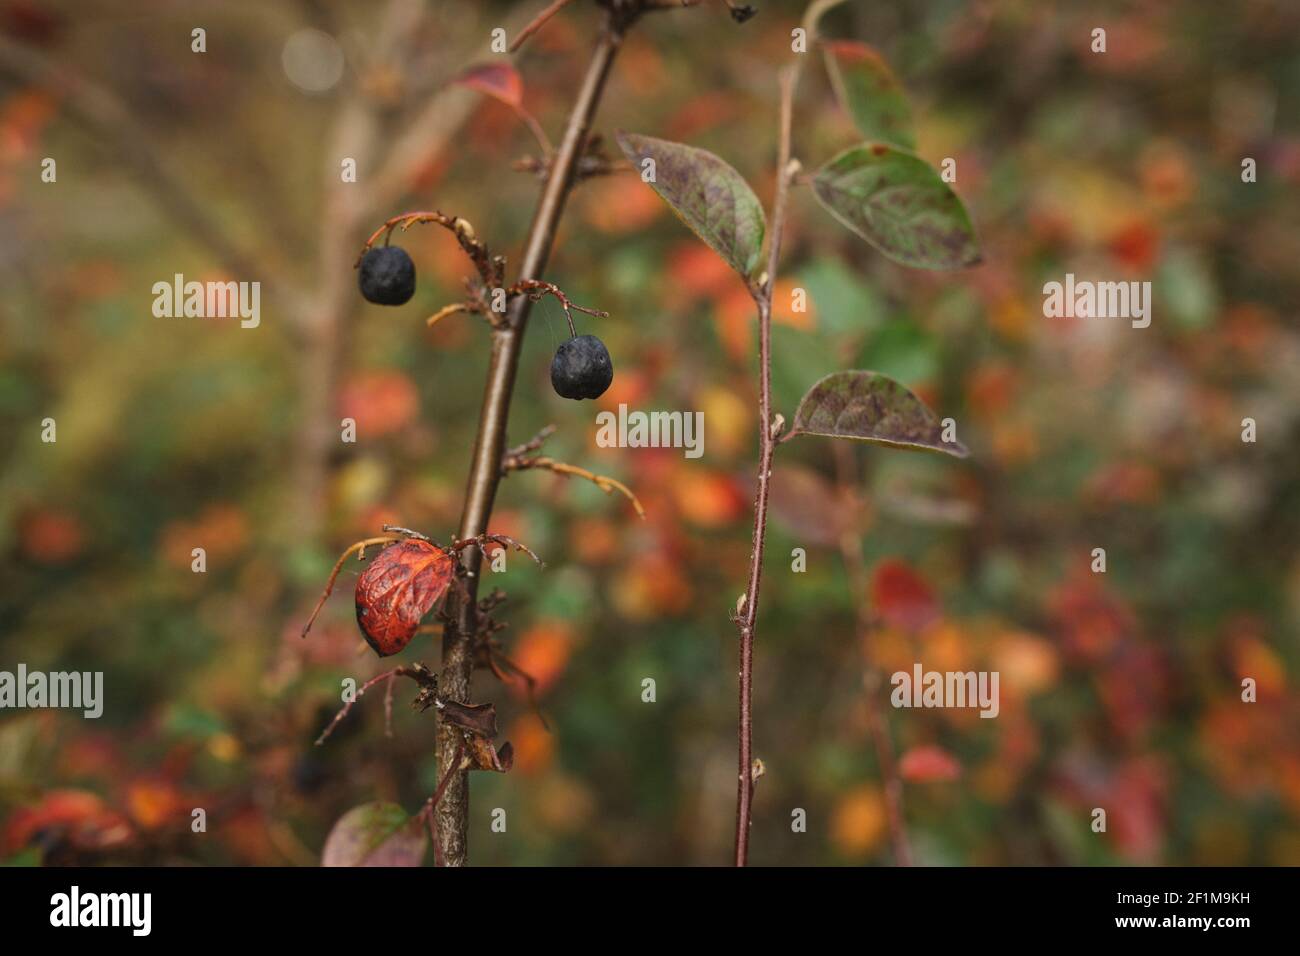 Close-up of blueberries on plant Stock Photo